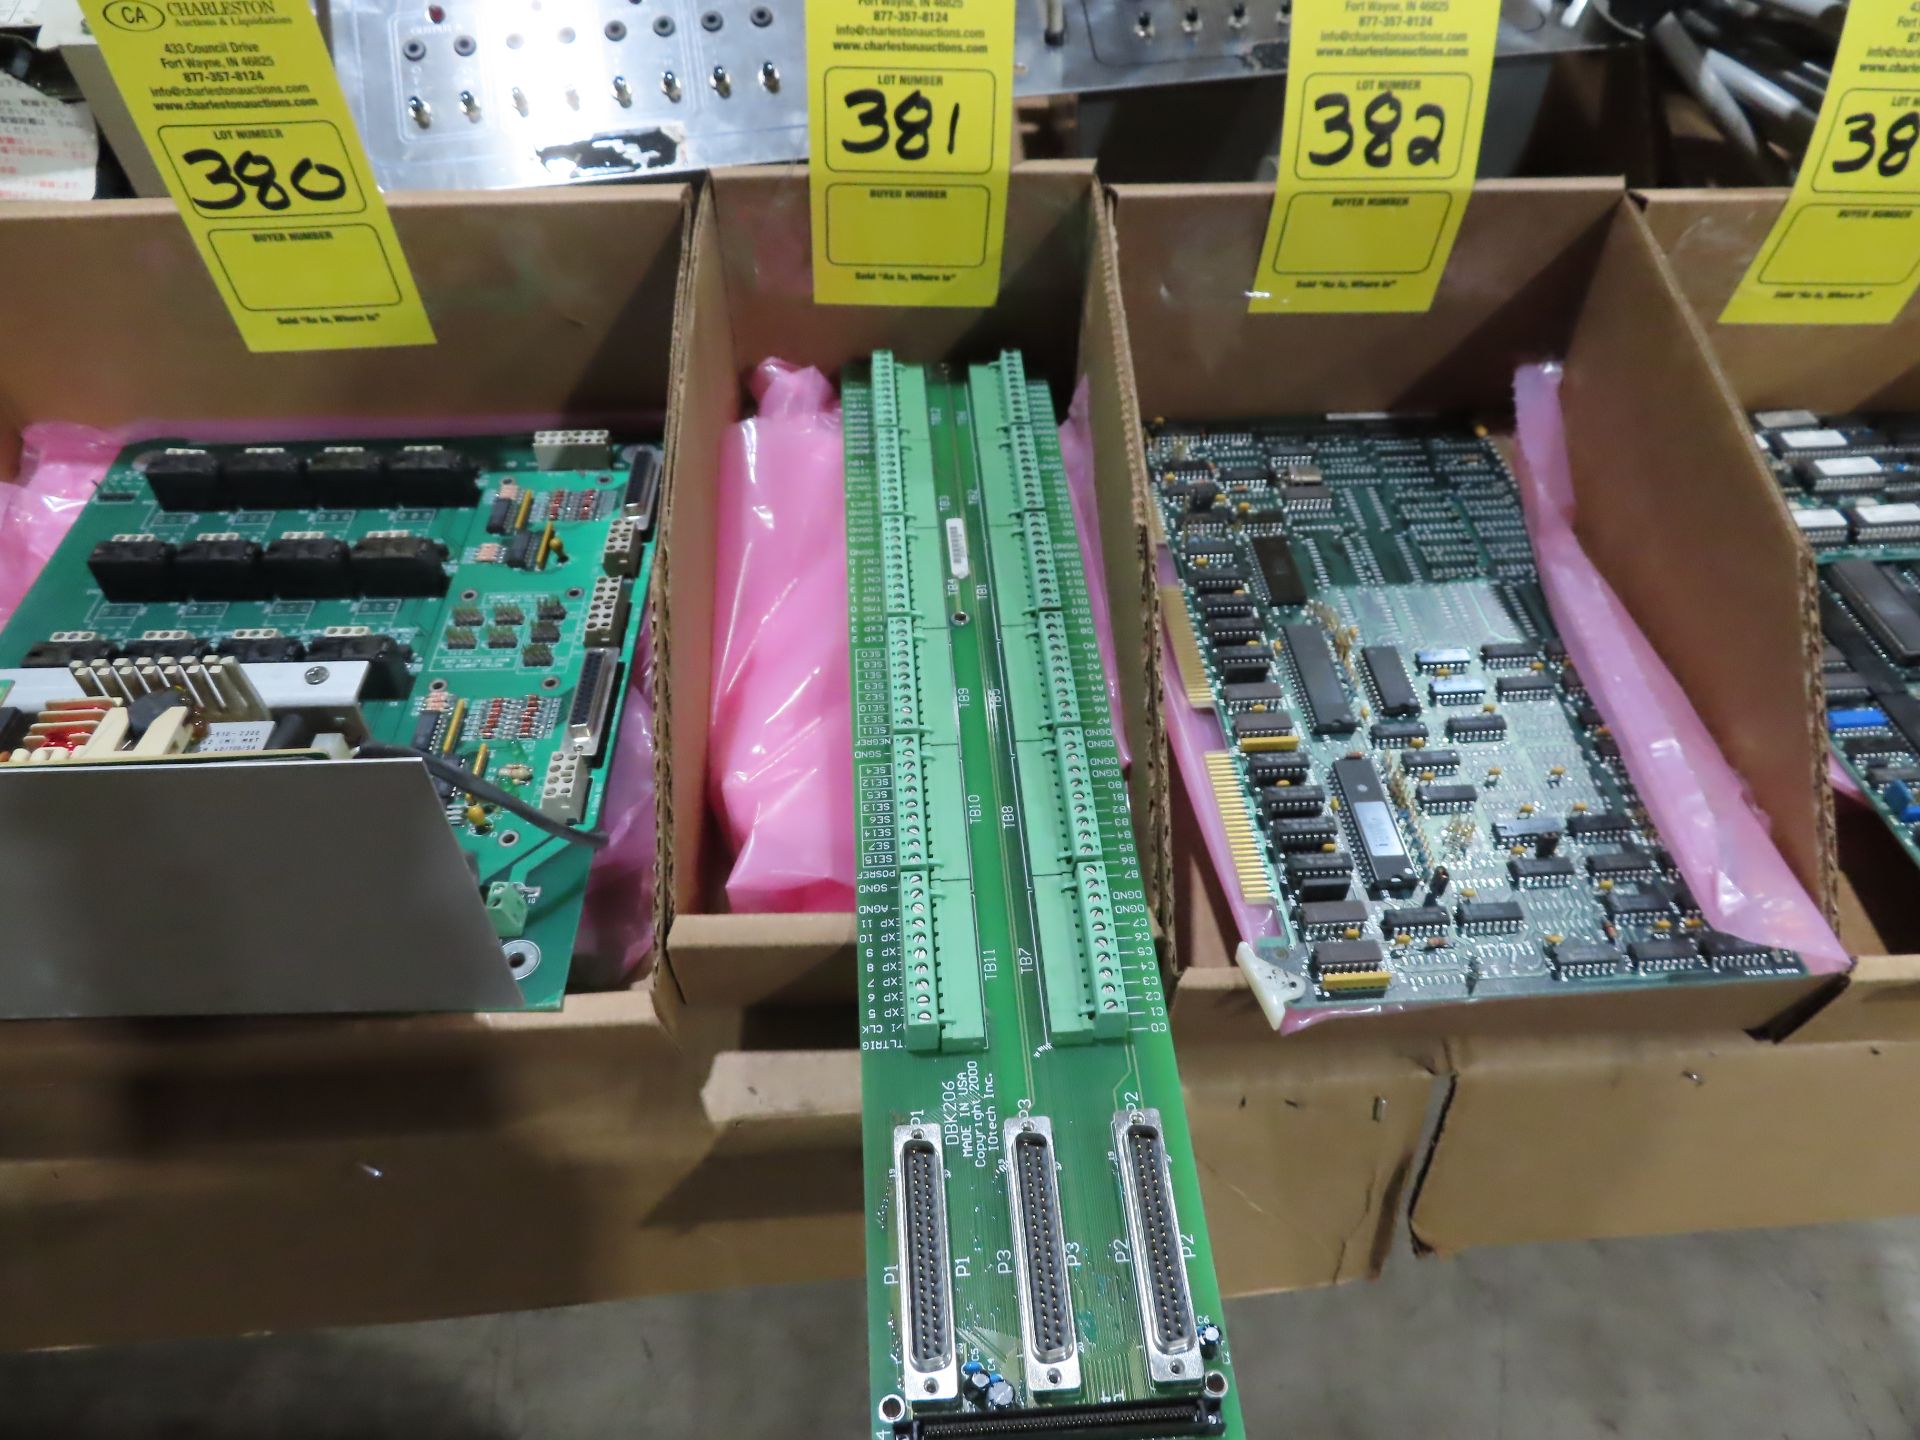 Iotech DBK206, 1060-0435 board, as always, with Brolyn LLC auctions, all lots can be picked up